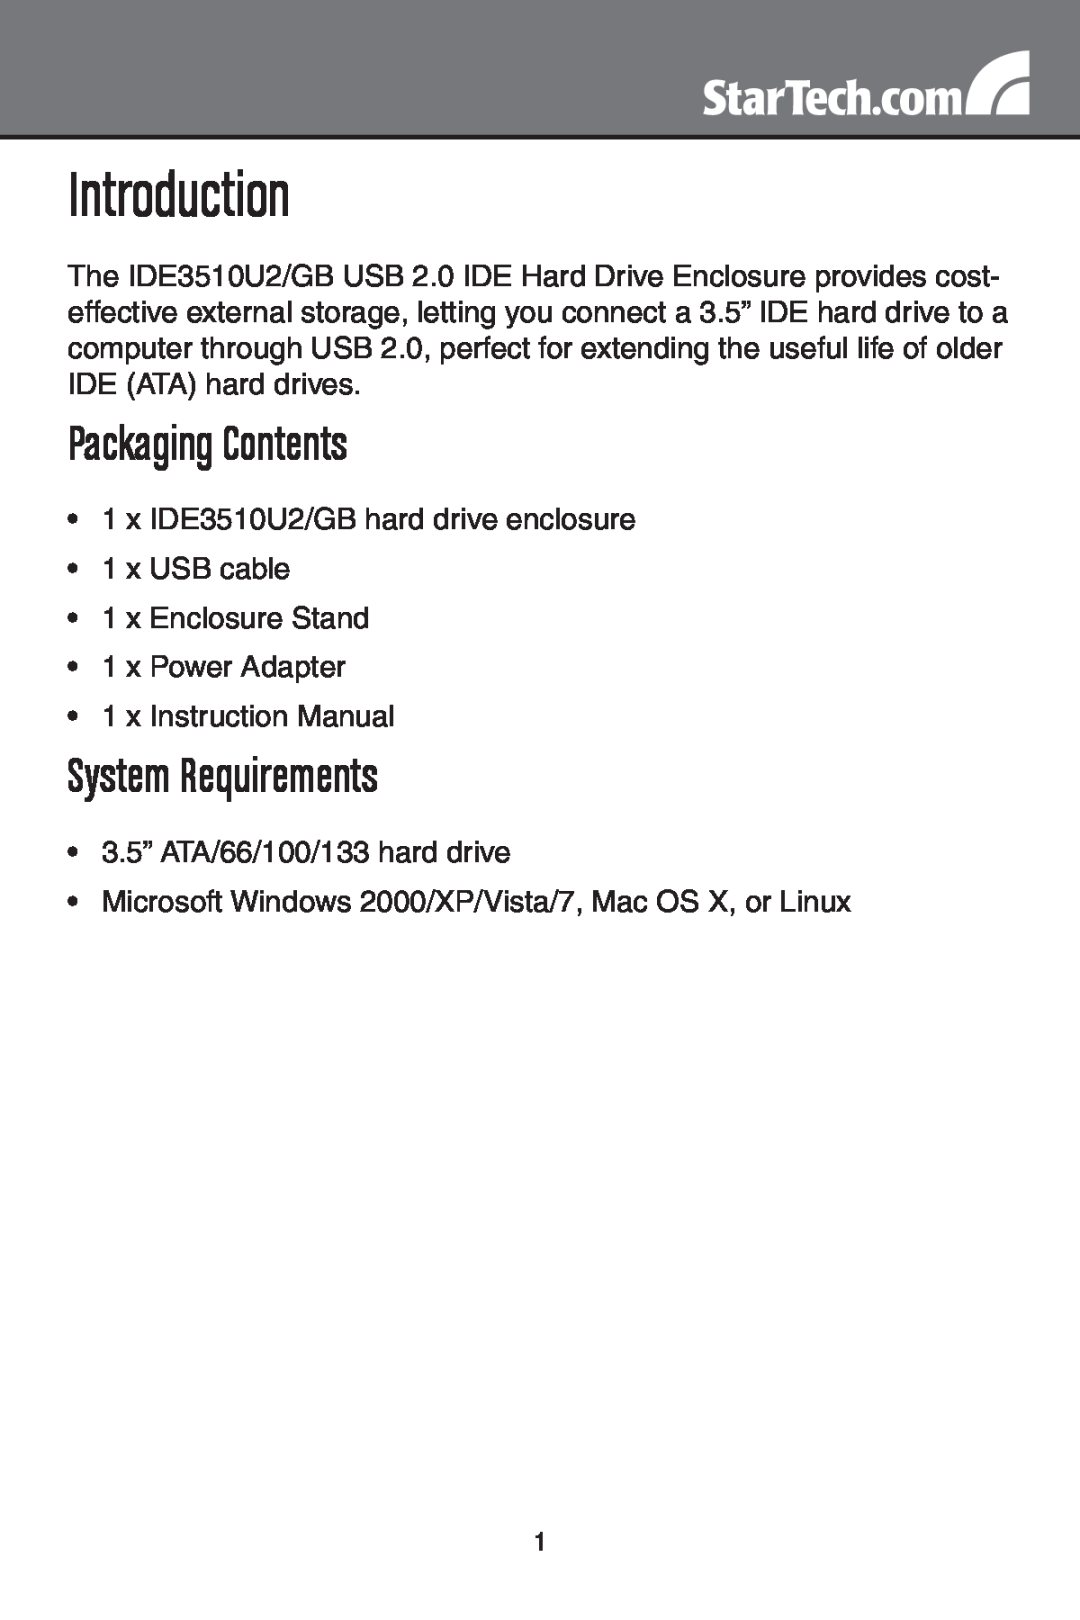 StarTech.com IDE3510U2GB instruction manual Introduction, Packaging Contents, System Requirements 